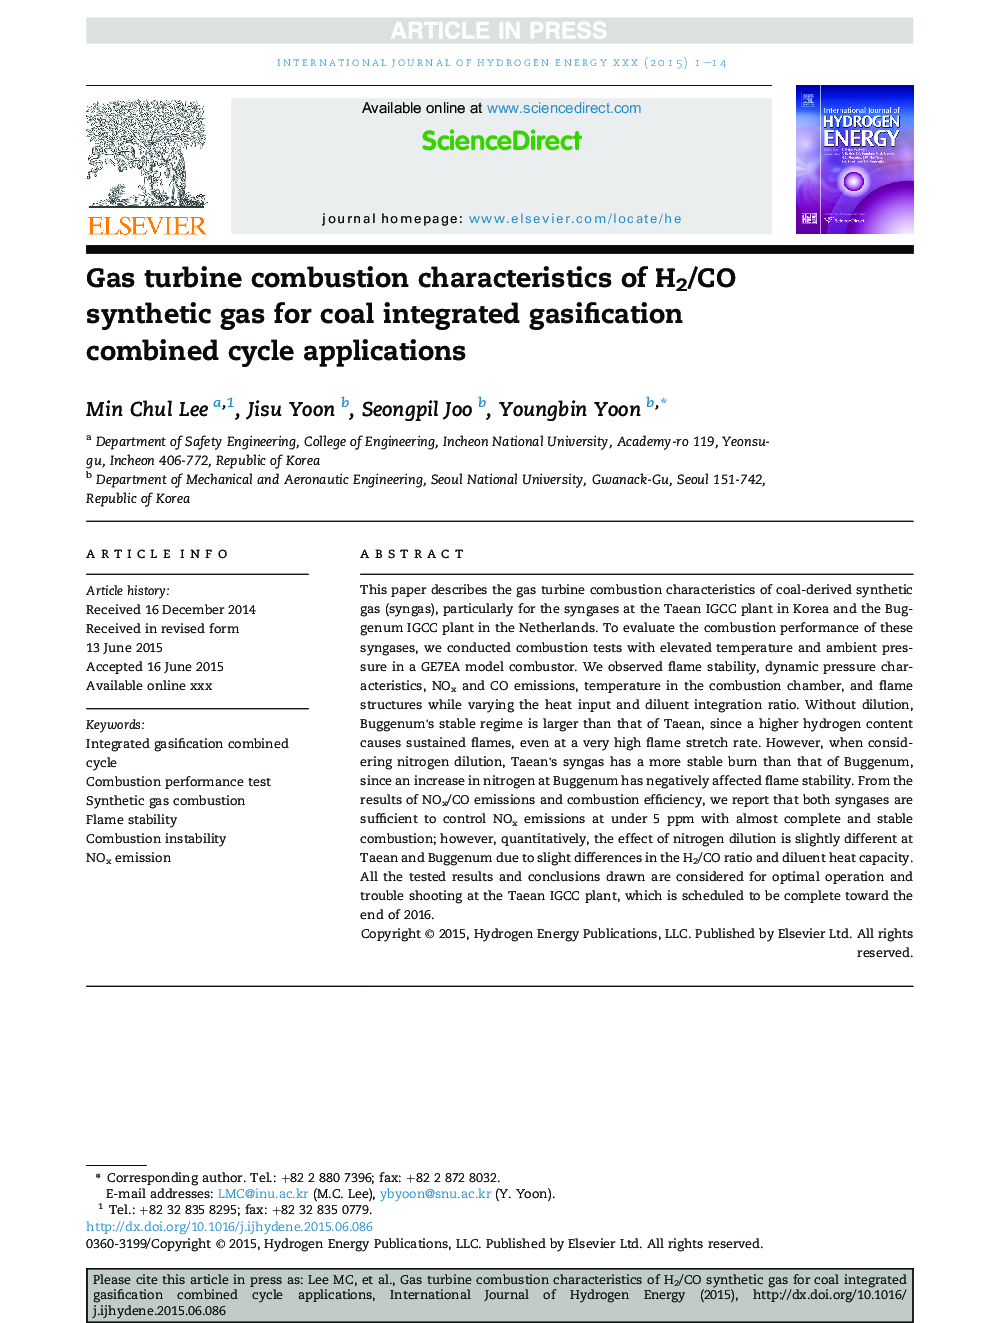 Gas turbine combustion characteristics of H2/CO synthetic gas for coal integrated gasification combined cycle applications